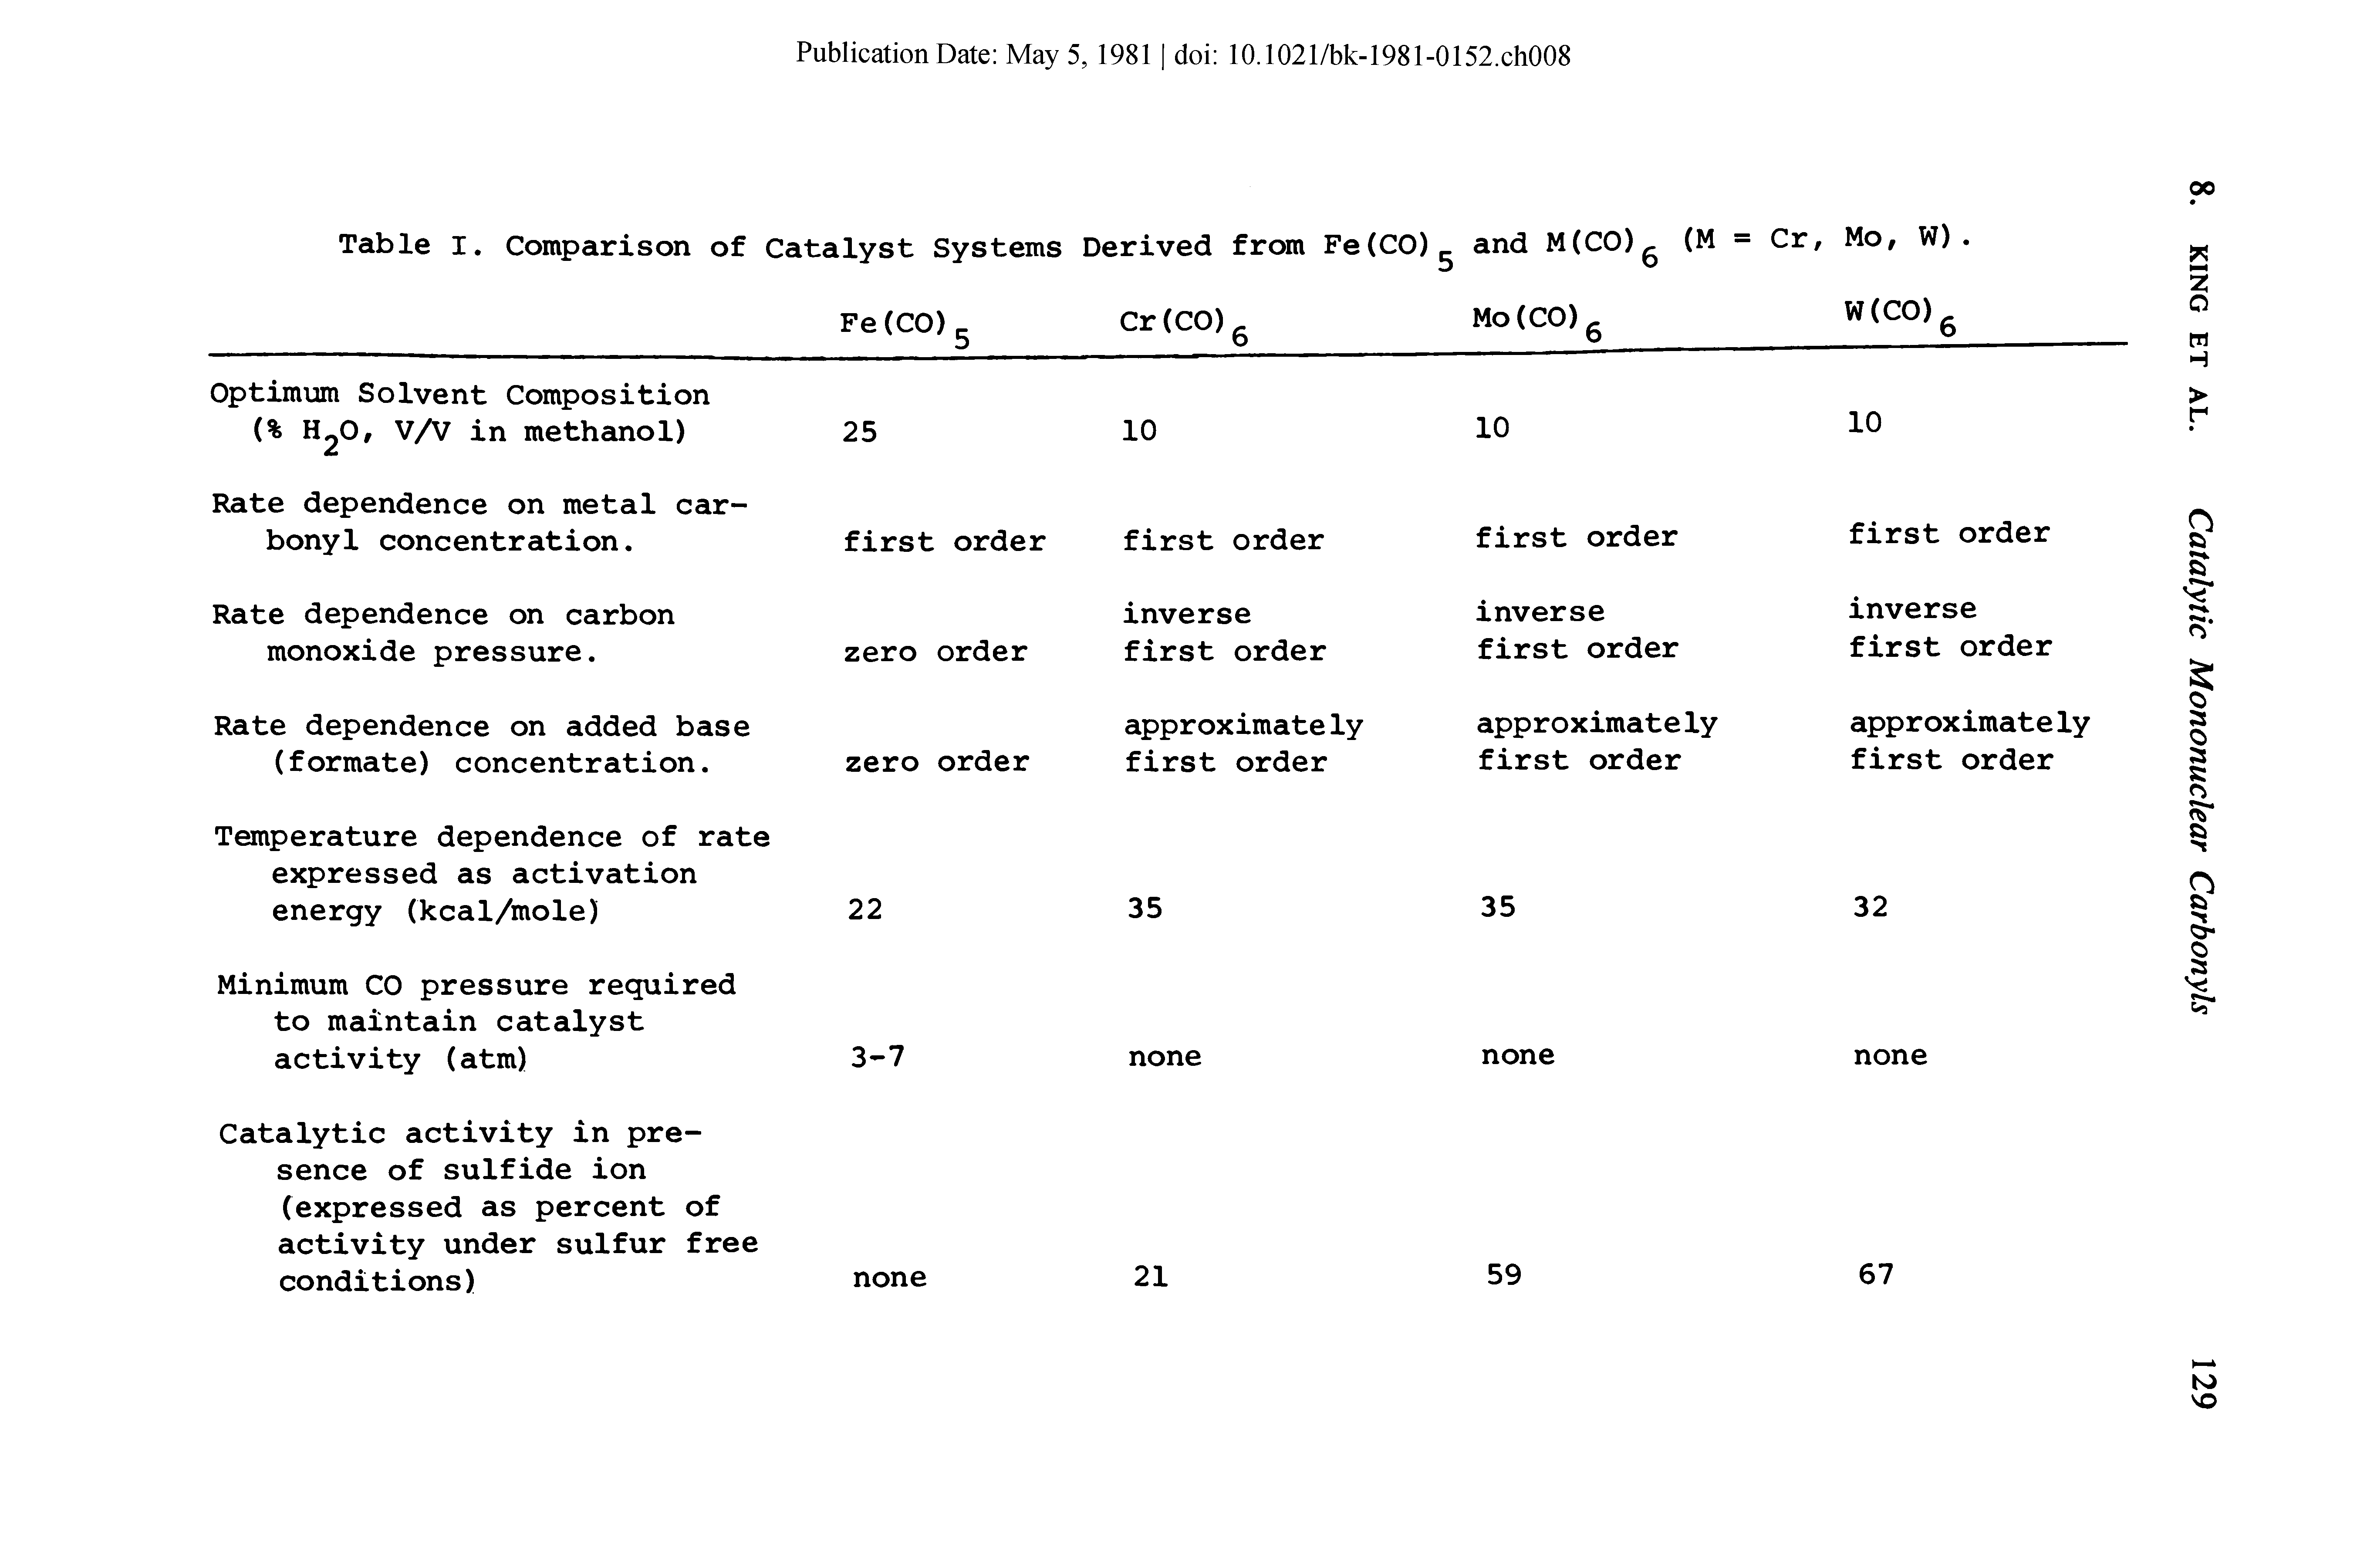 Table I. Comparison of Catalyst Systems Derived from Fe(CO),. and M(C0)6 (M = Cr, Mo, W).